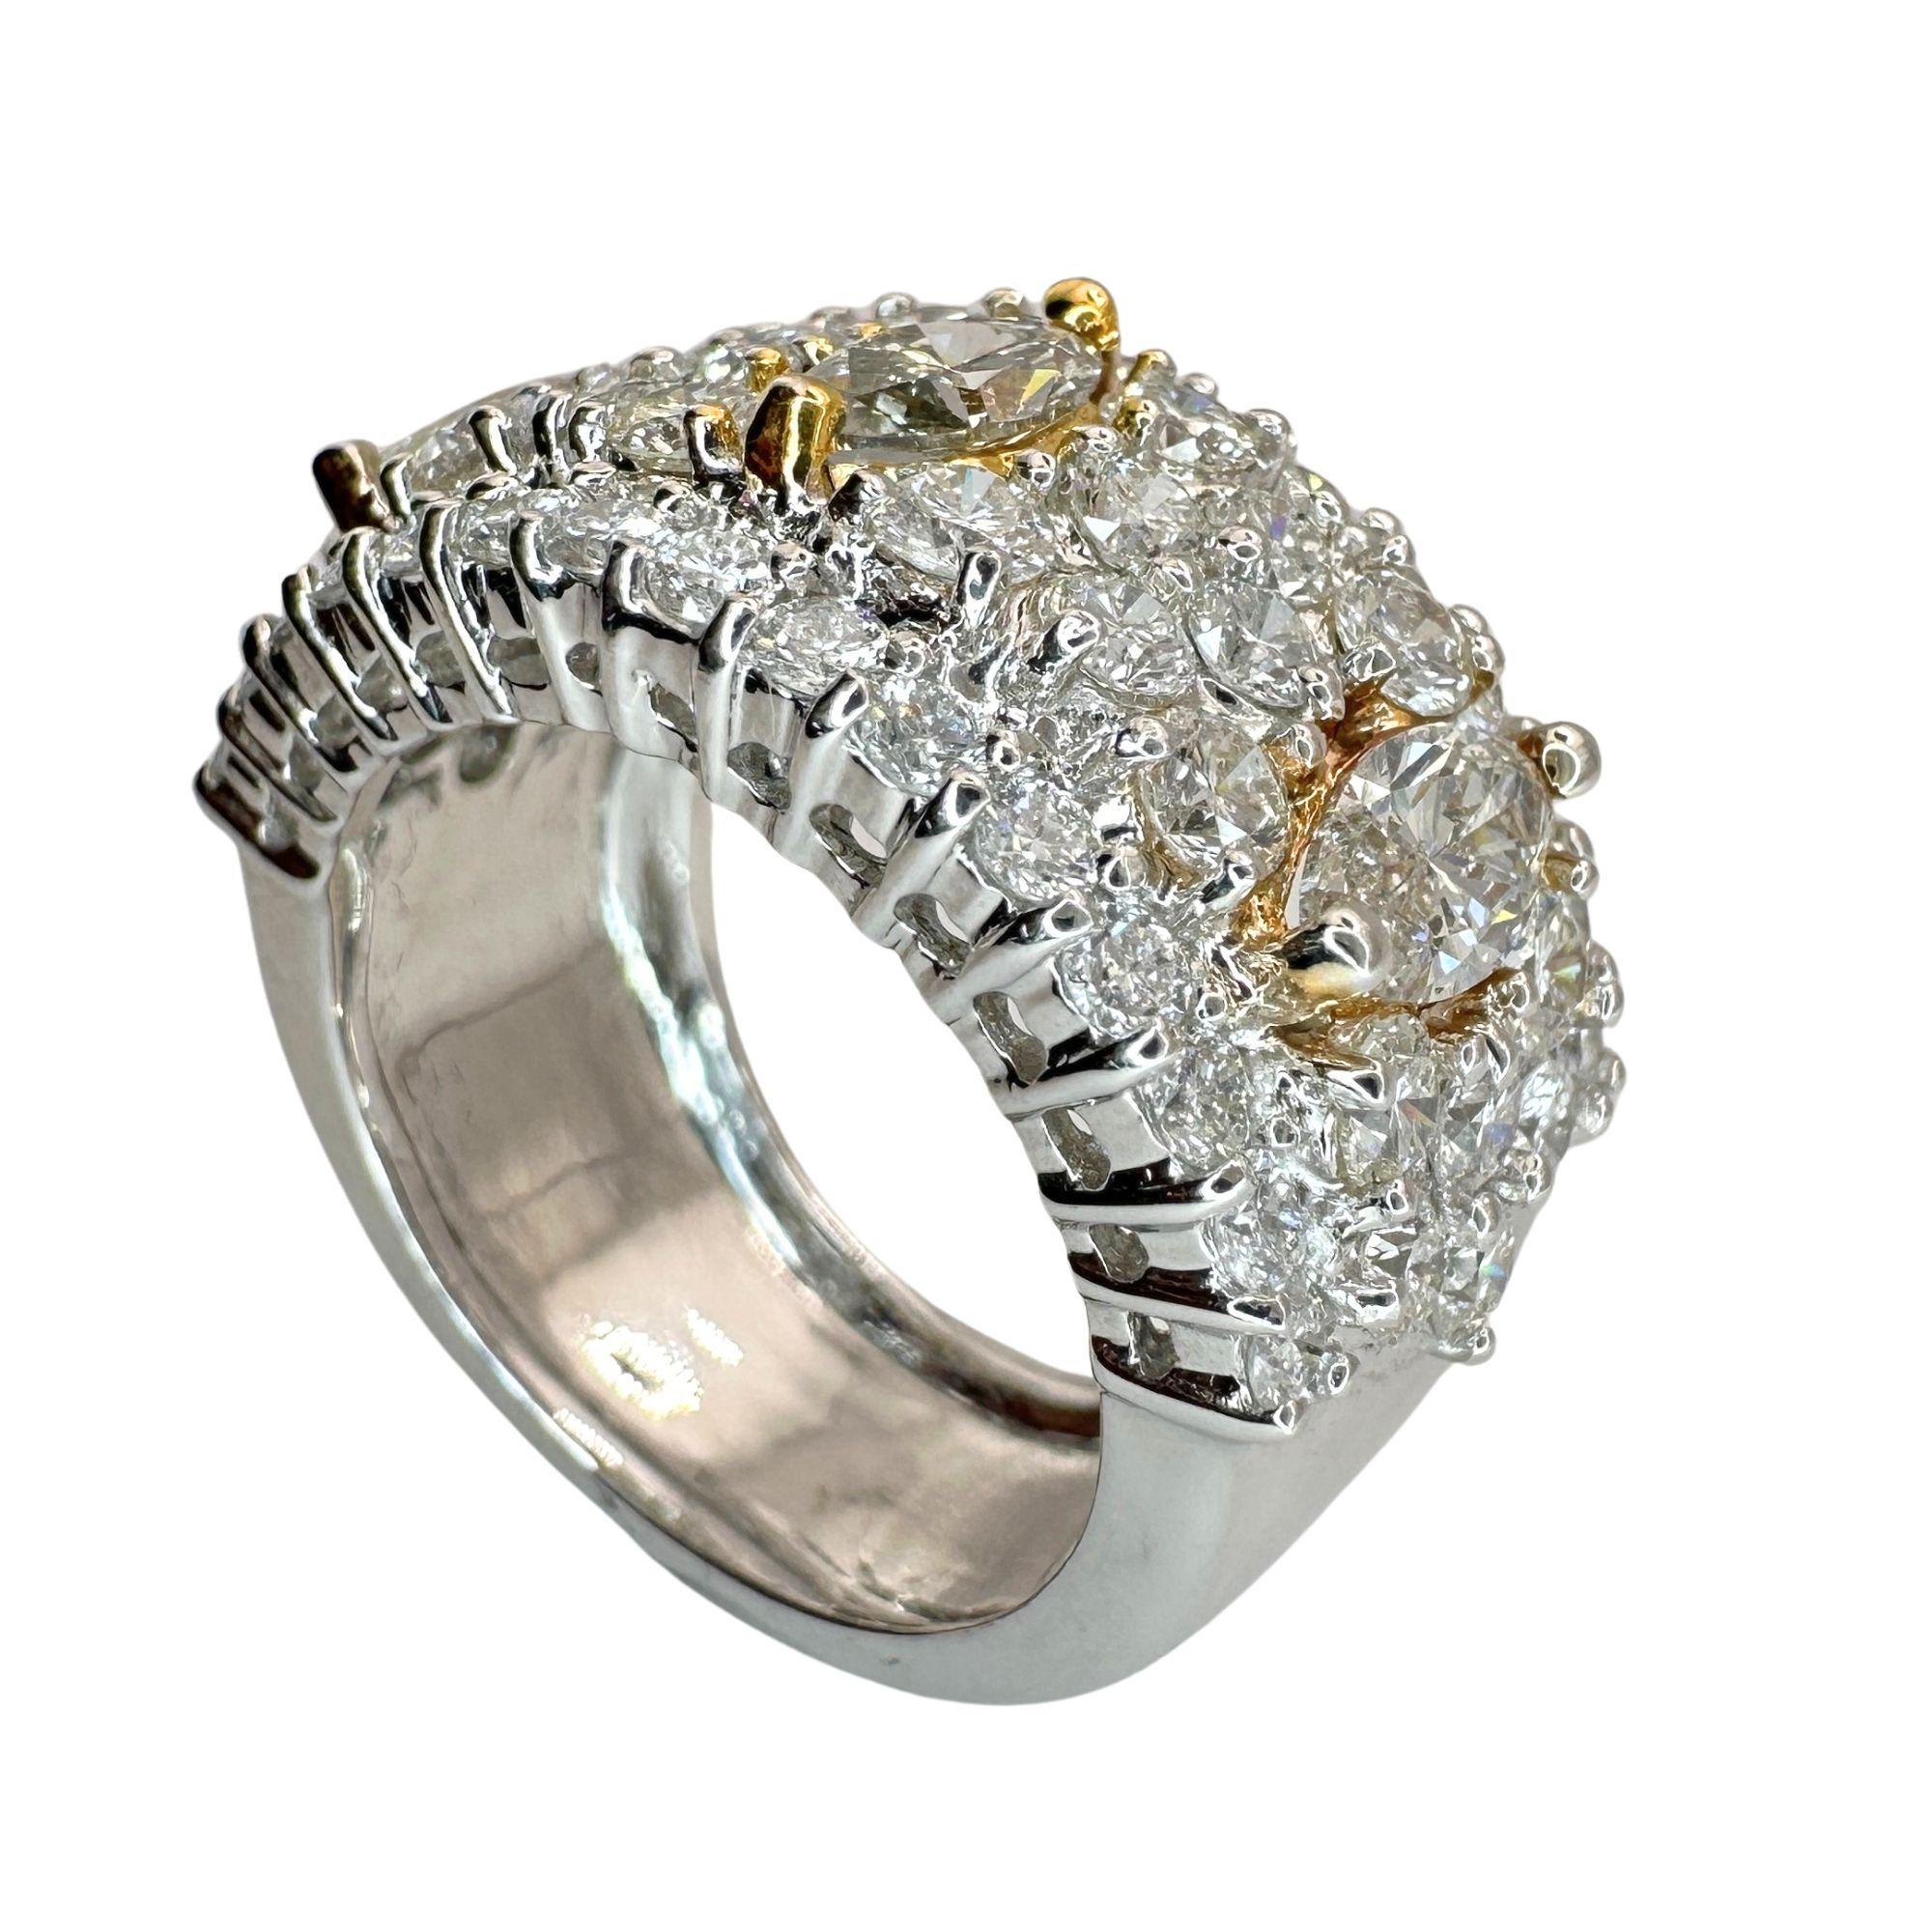 Treat yourself to pure elegance with our 18k Marquise Cut Diamond Wide Band Ring. Crafted with 18k white and yellow gold, this ring is in good condition with minor surface wear. The marquise cut diamonds, totaling 1.18 carats, glisten alongside 2.54